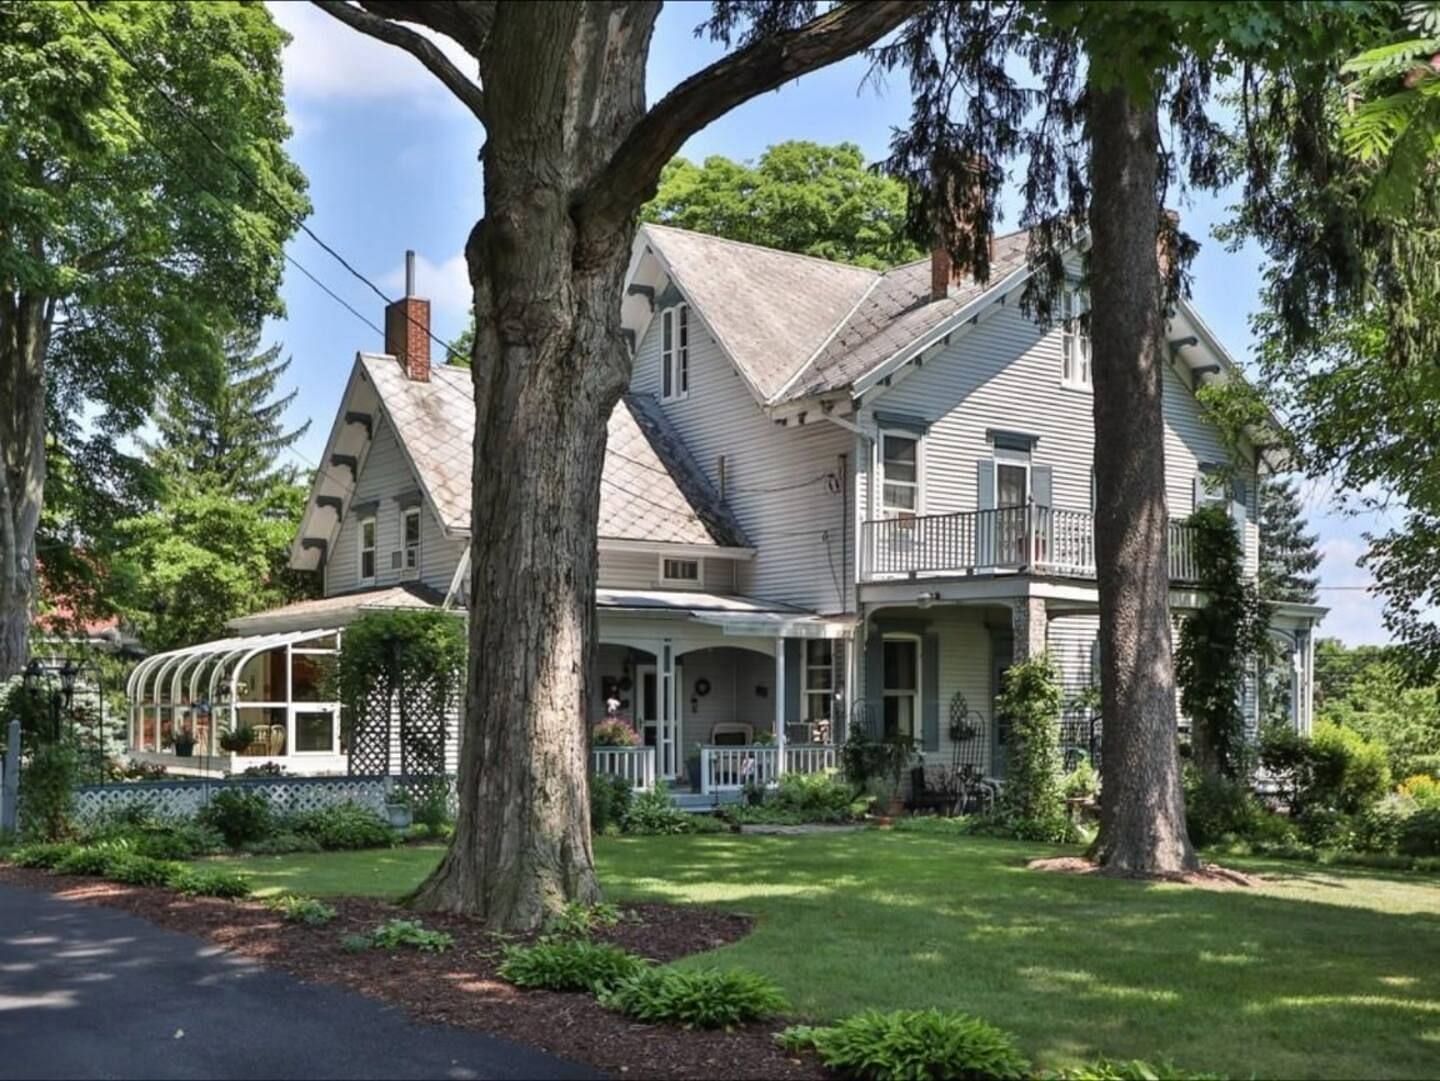 JWguest House at Chester, New York | Victorian Style Historic Home |  2pax #5 | Jwbnb no brobnb 17